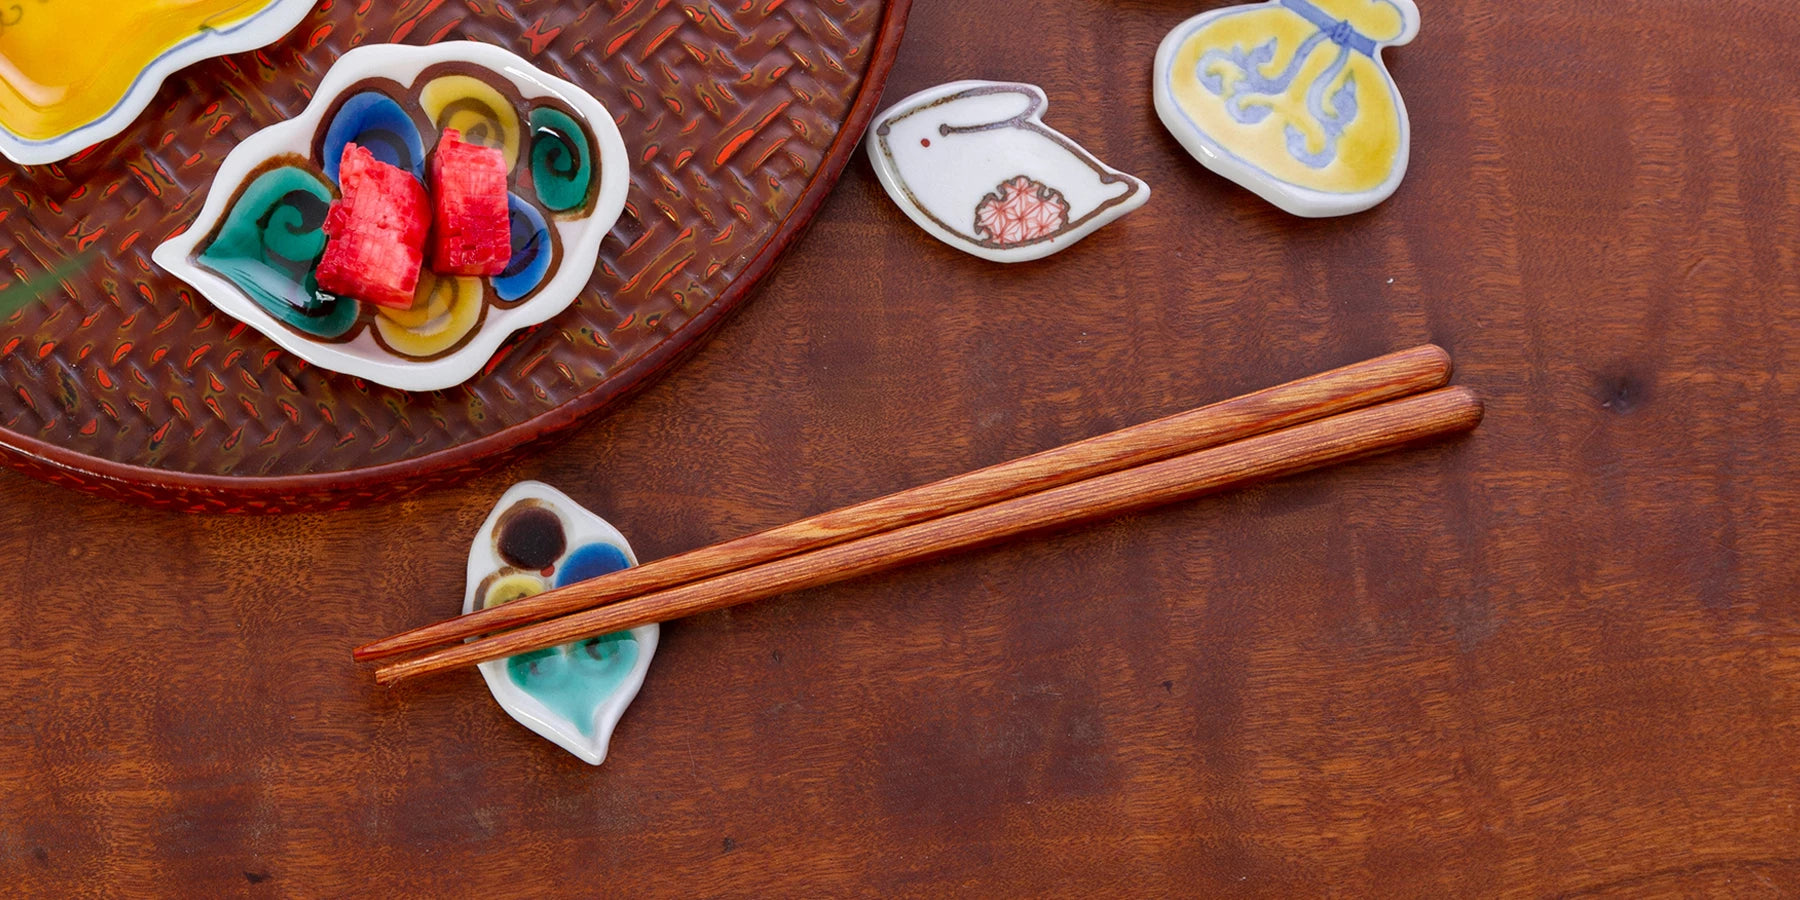 Discover our great selection of Chopstick Accessories at Globalkitchen Japan.